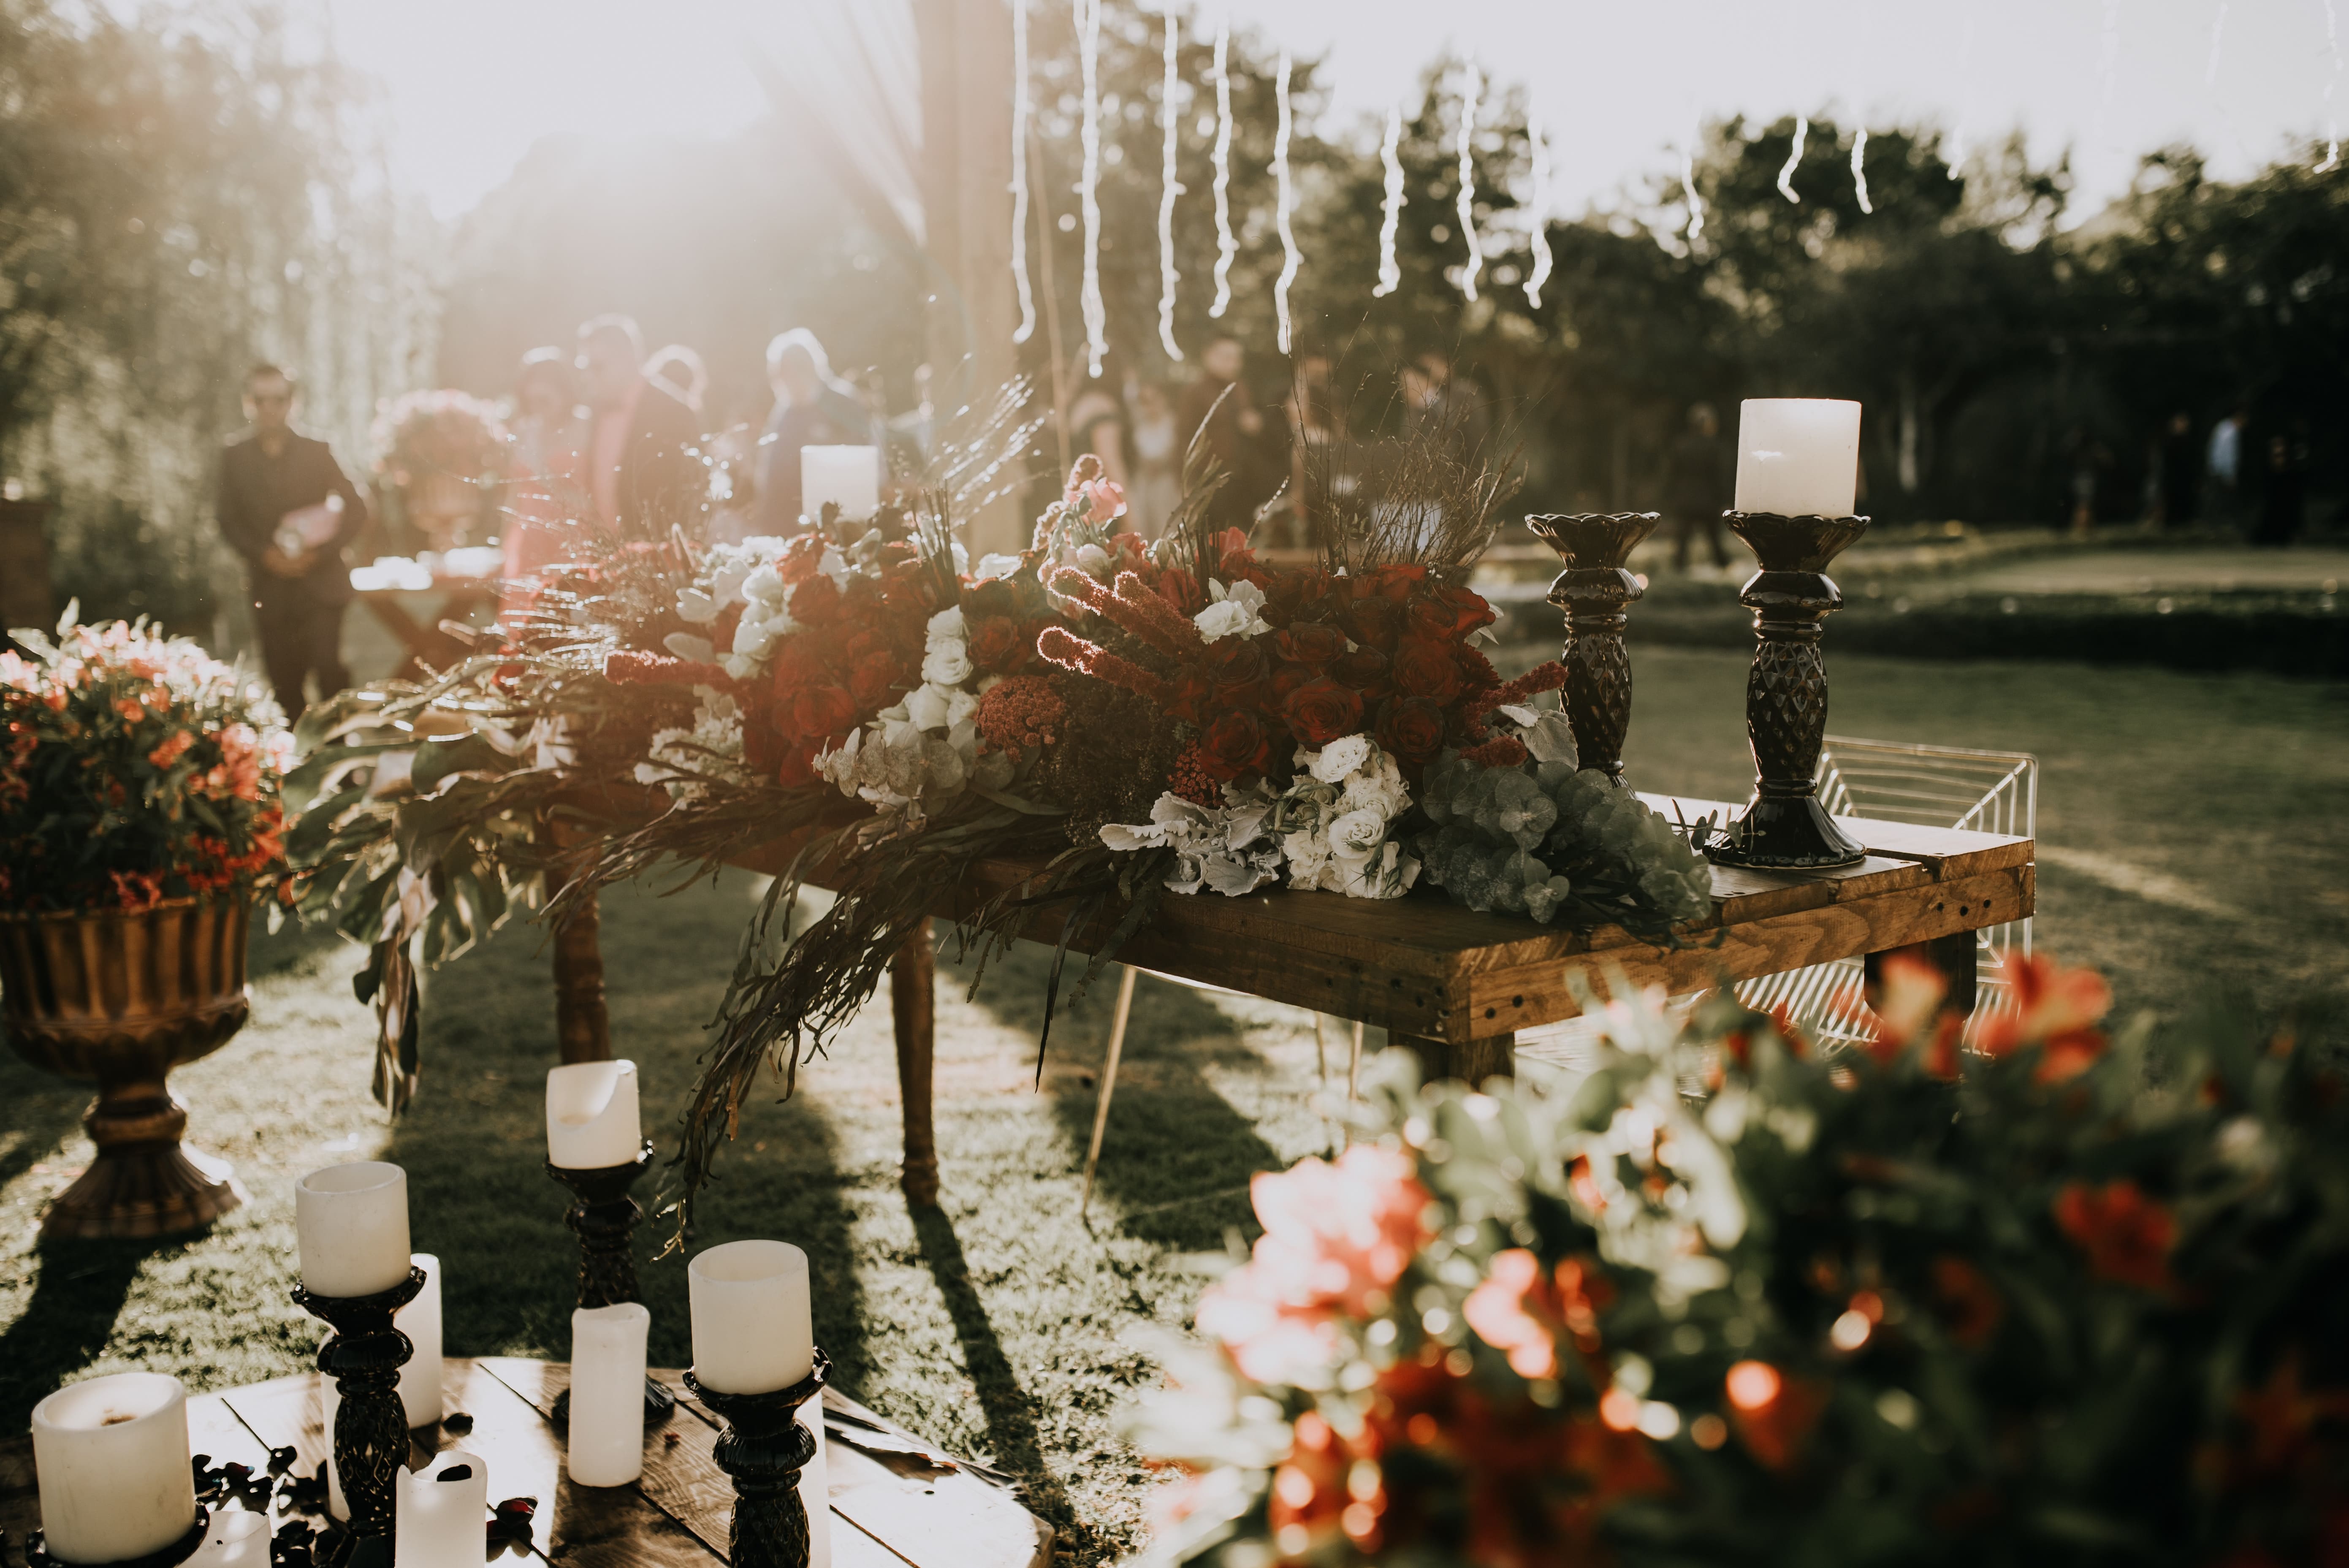 7 Wedding Venue Marketing Ideas You Need to Stand Out